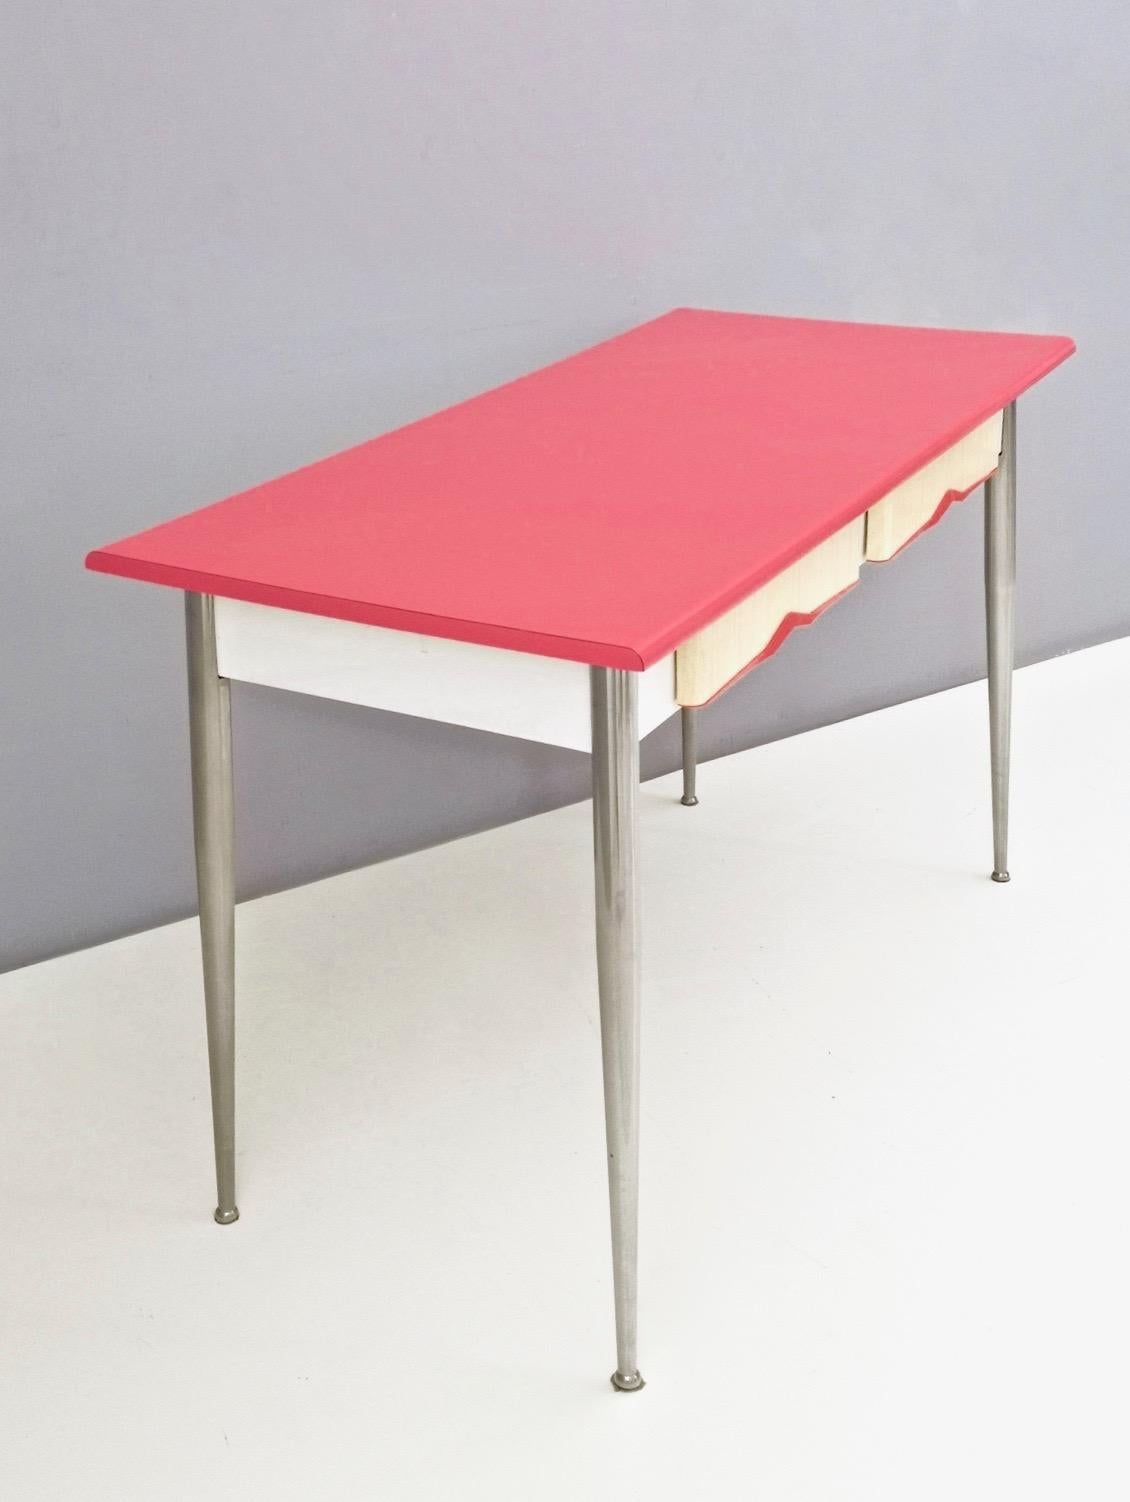 Italian Midcentury Dining Table with a Watermelon Pink Formica Top, Italy, 1950s